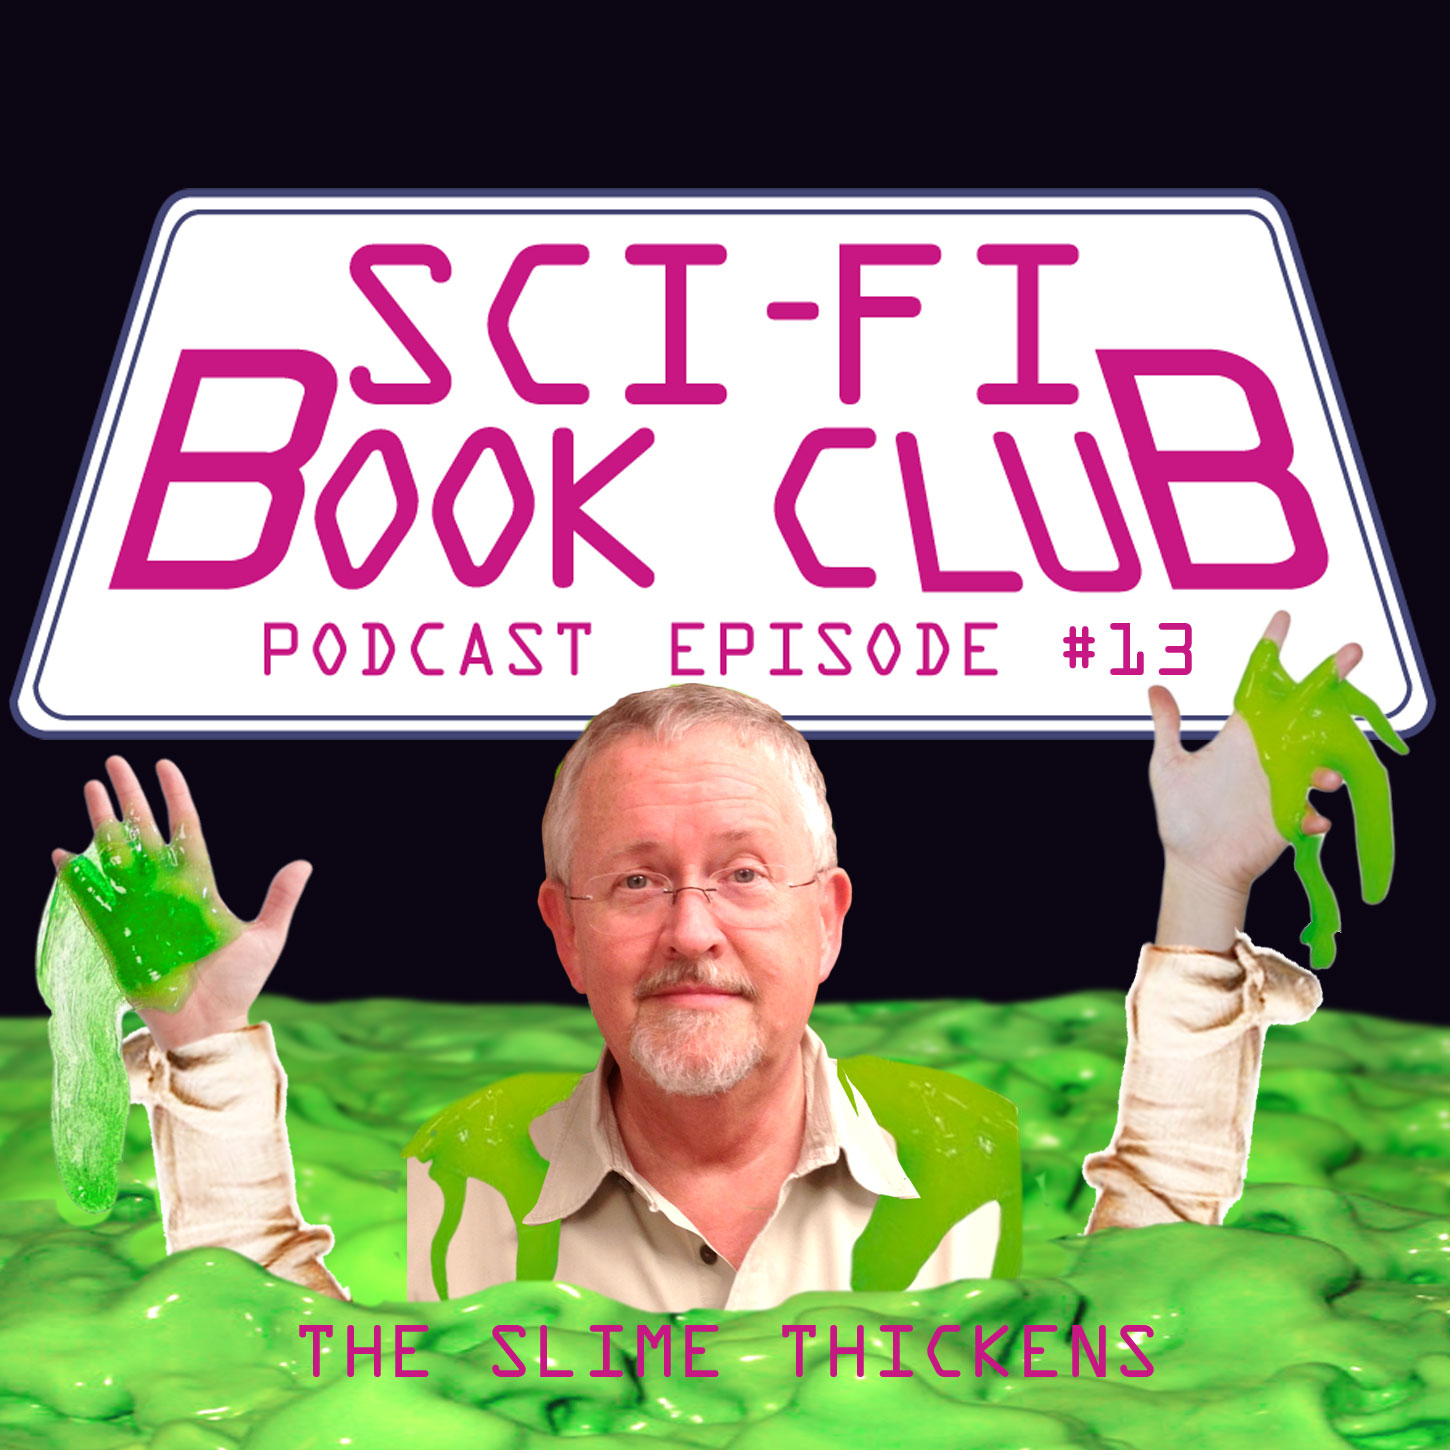 Sci-Fi Book Club Podcast #13: The Slime Thickens